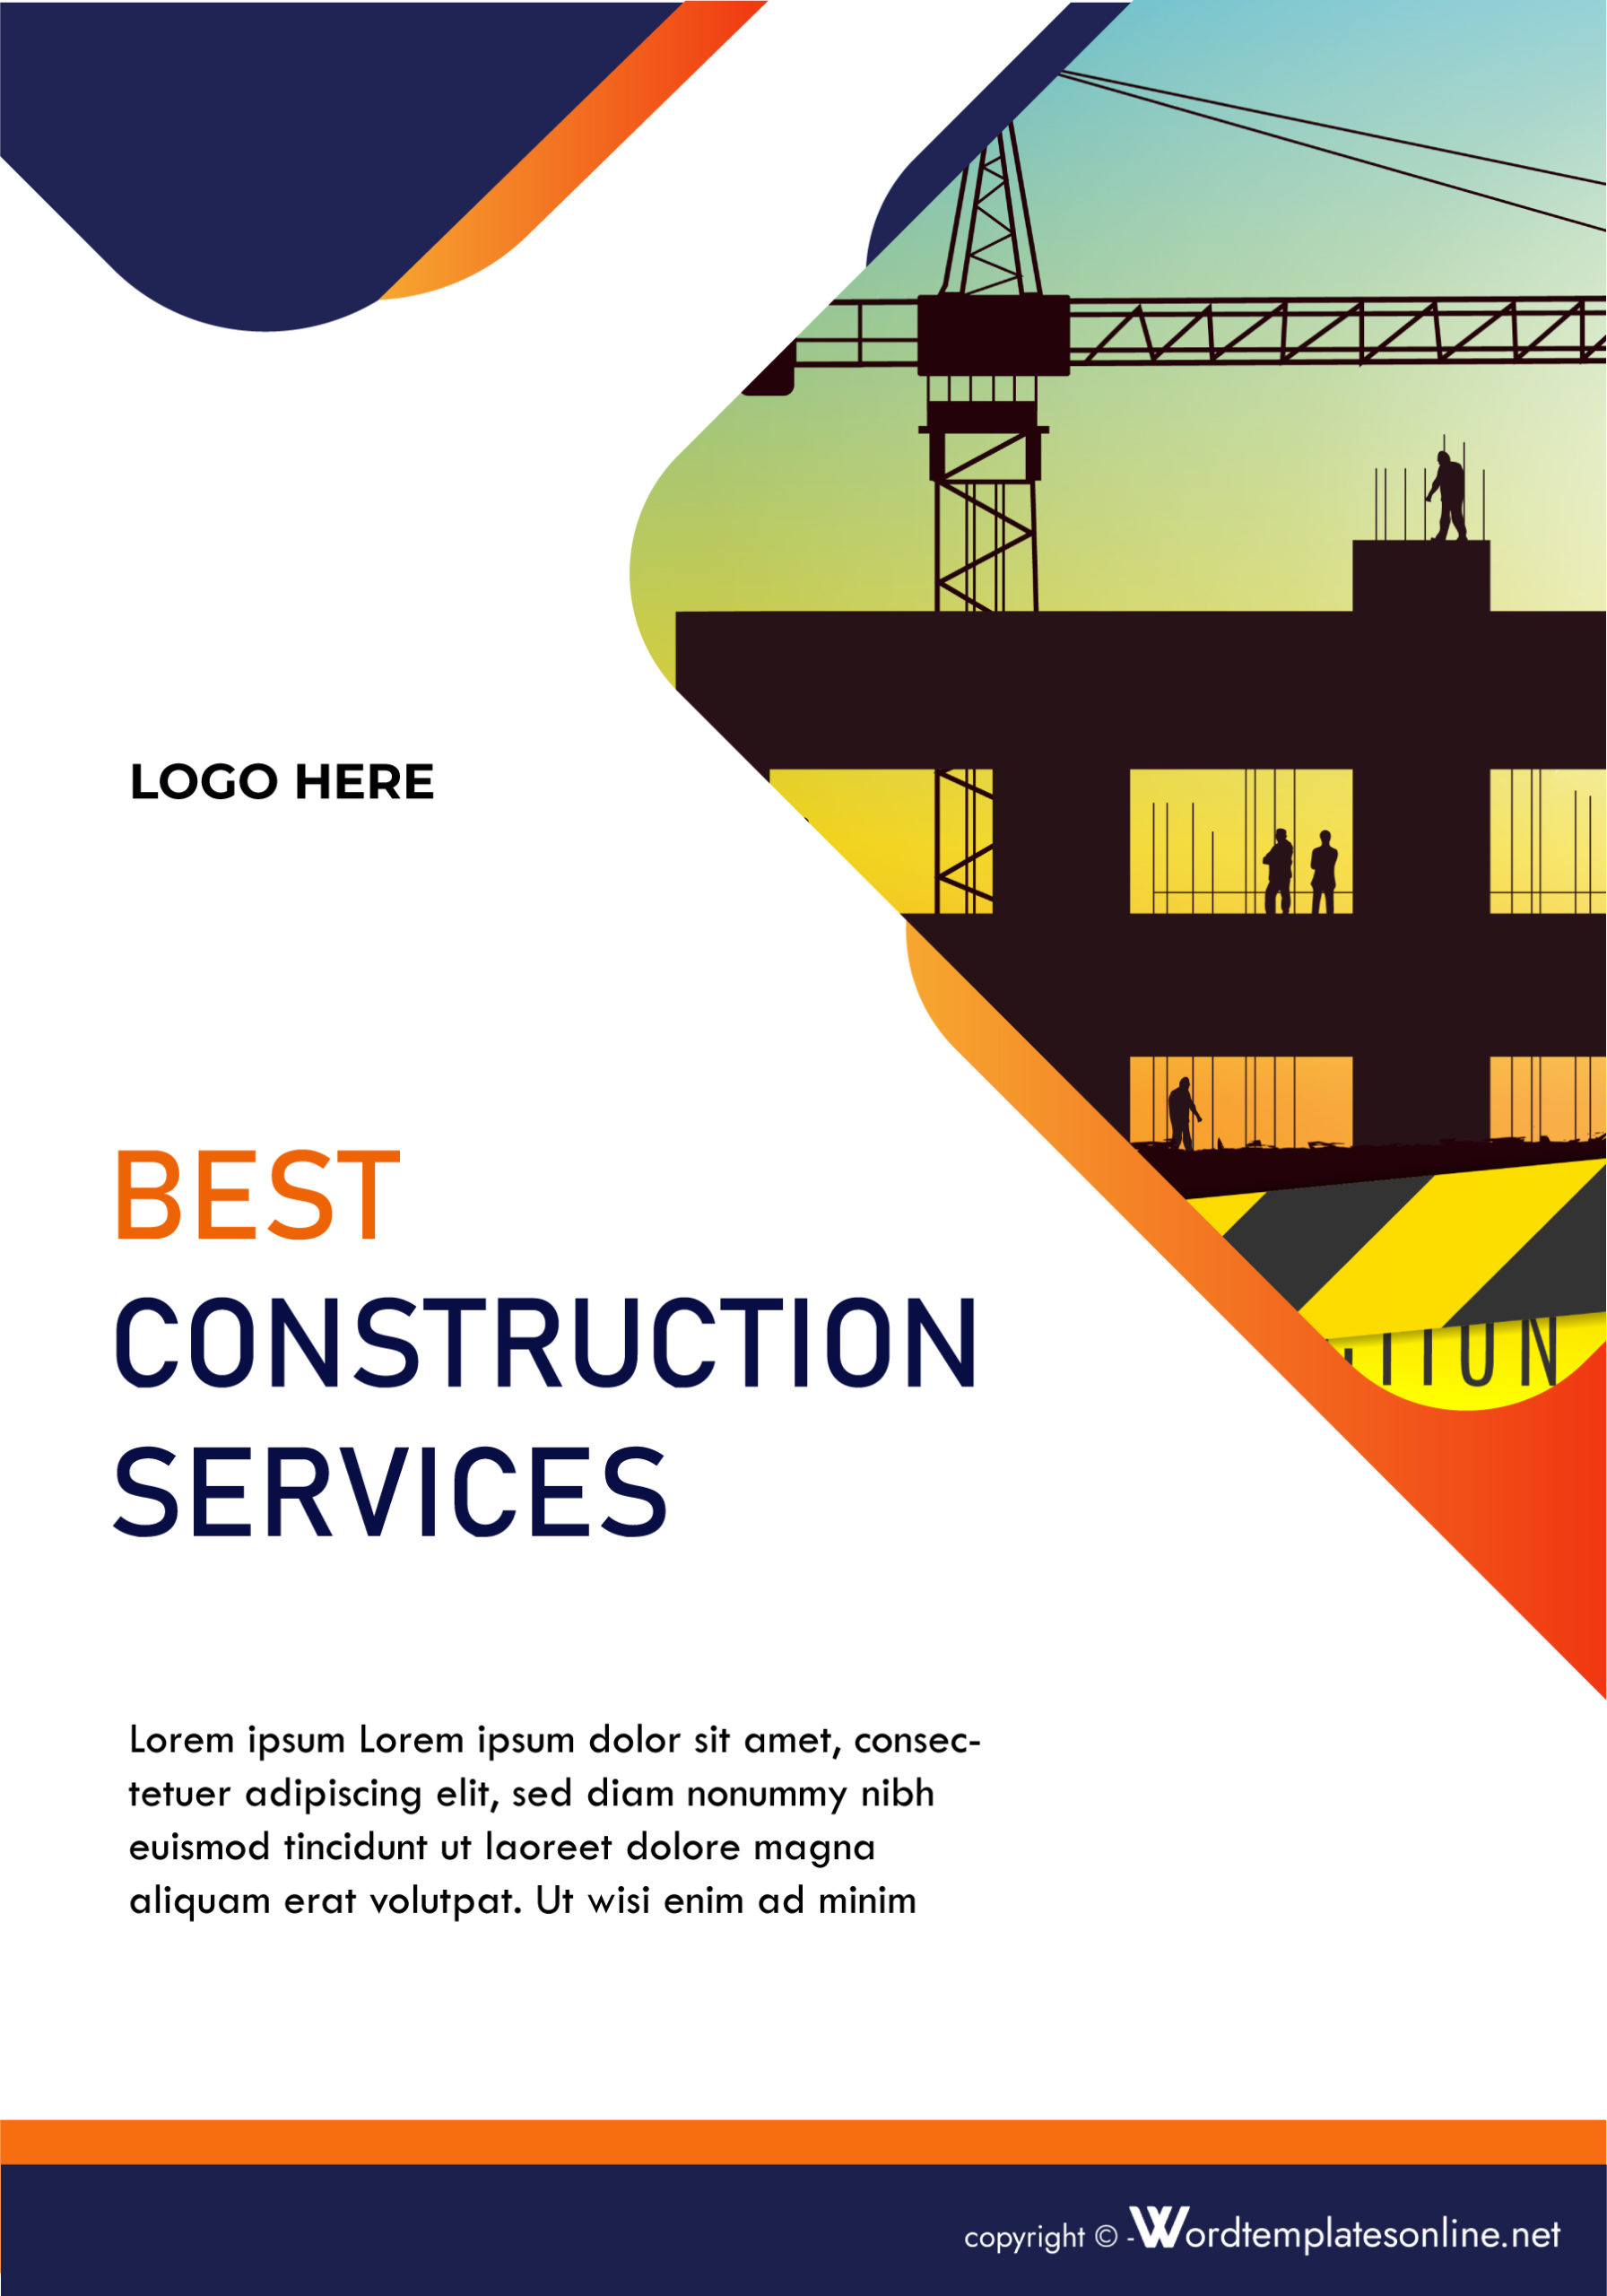 Professional Cover Page for Construction Services - Free Downloadable Template